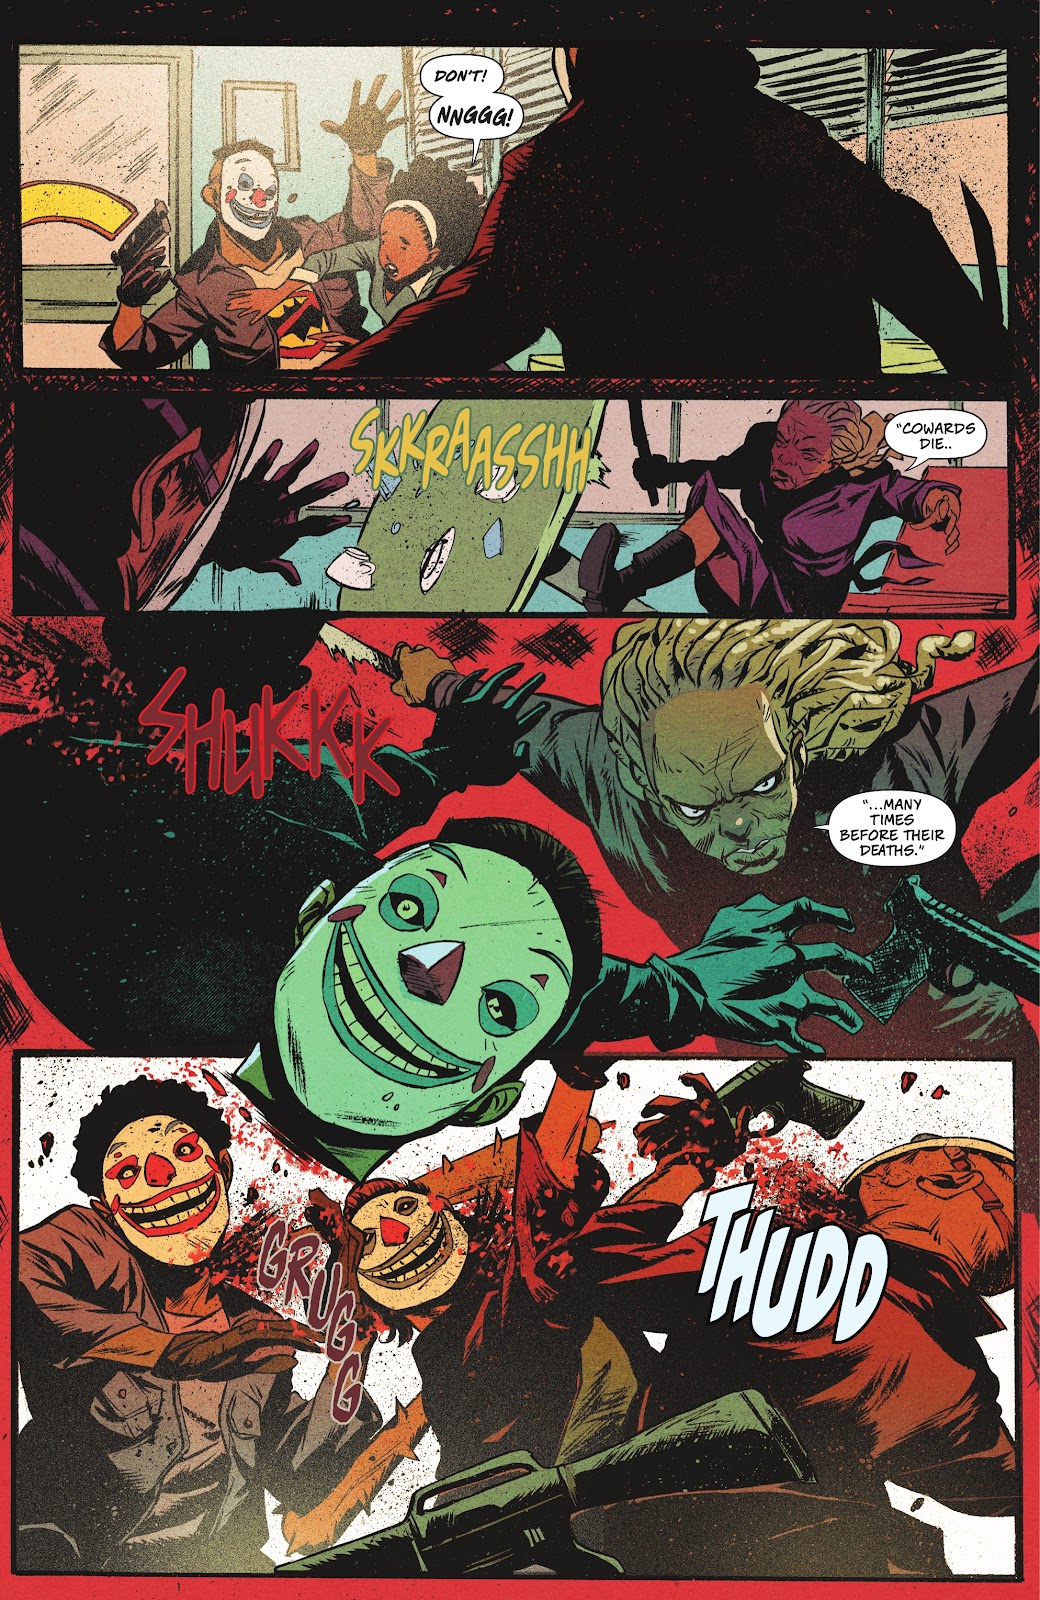 Red Hood: The Hill issue 1 - Page 8